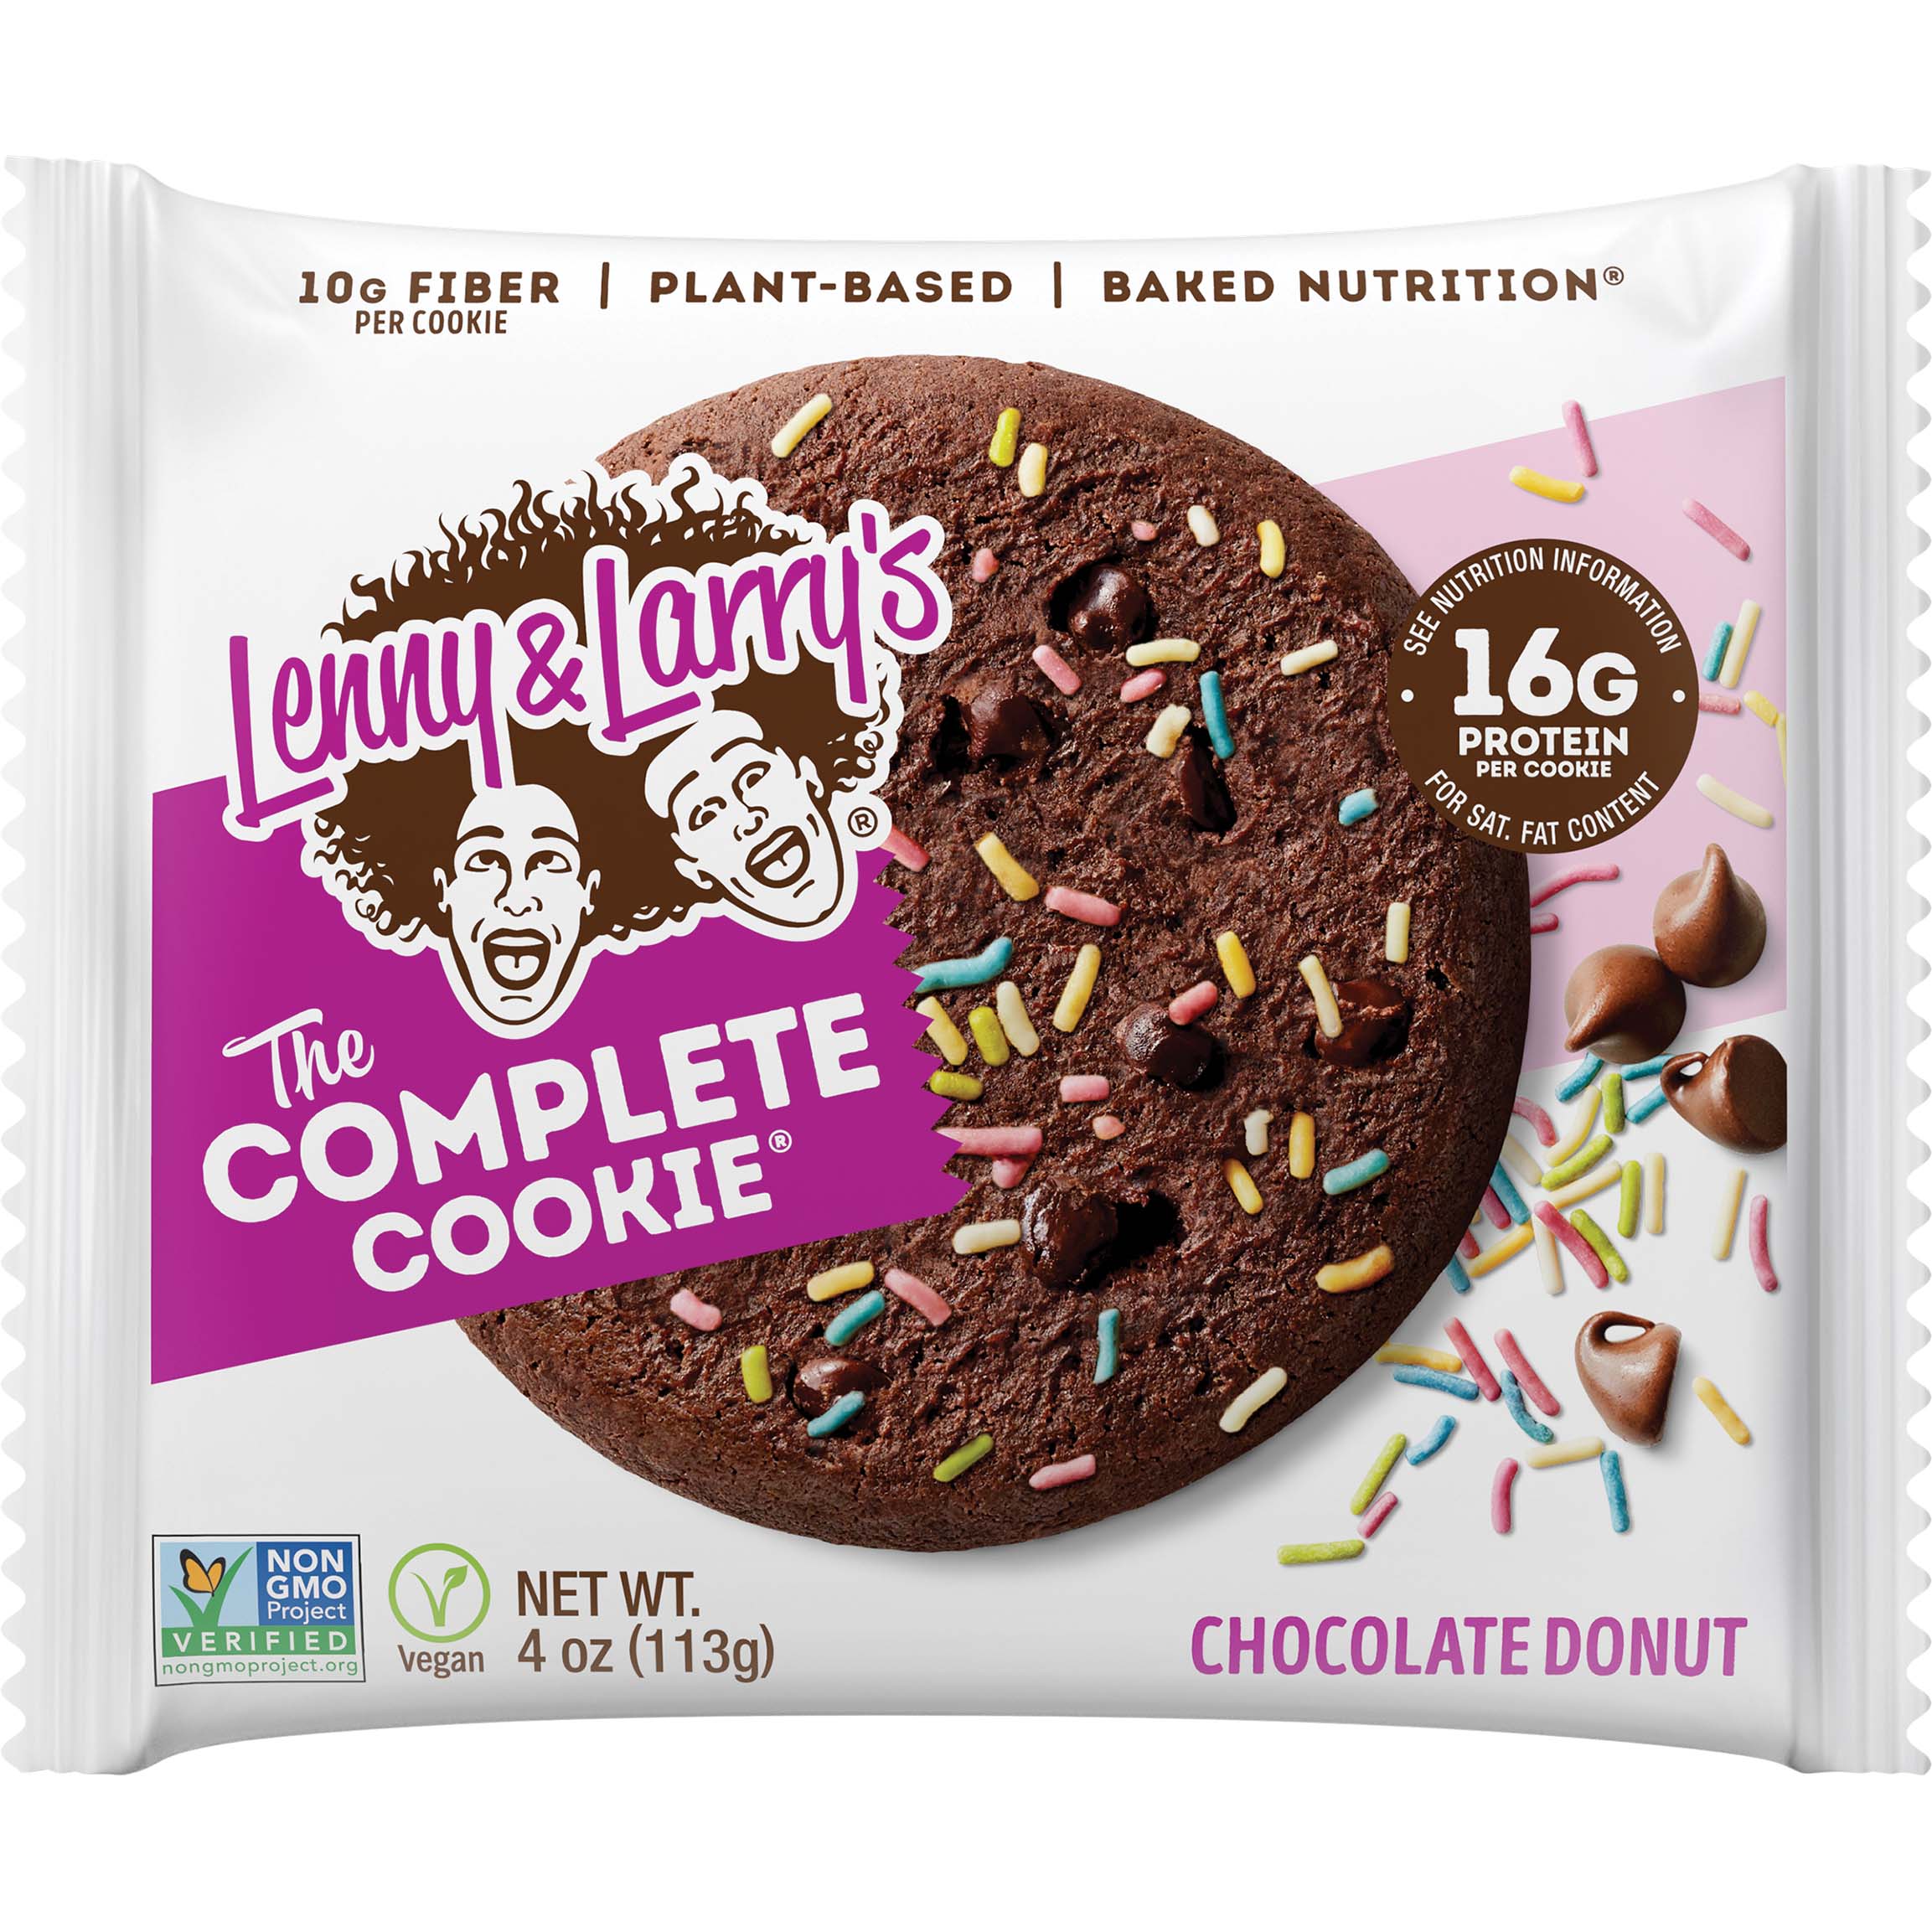 Lenny & Larry’s Complete Cookies 1 Piece Chocolate Donut